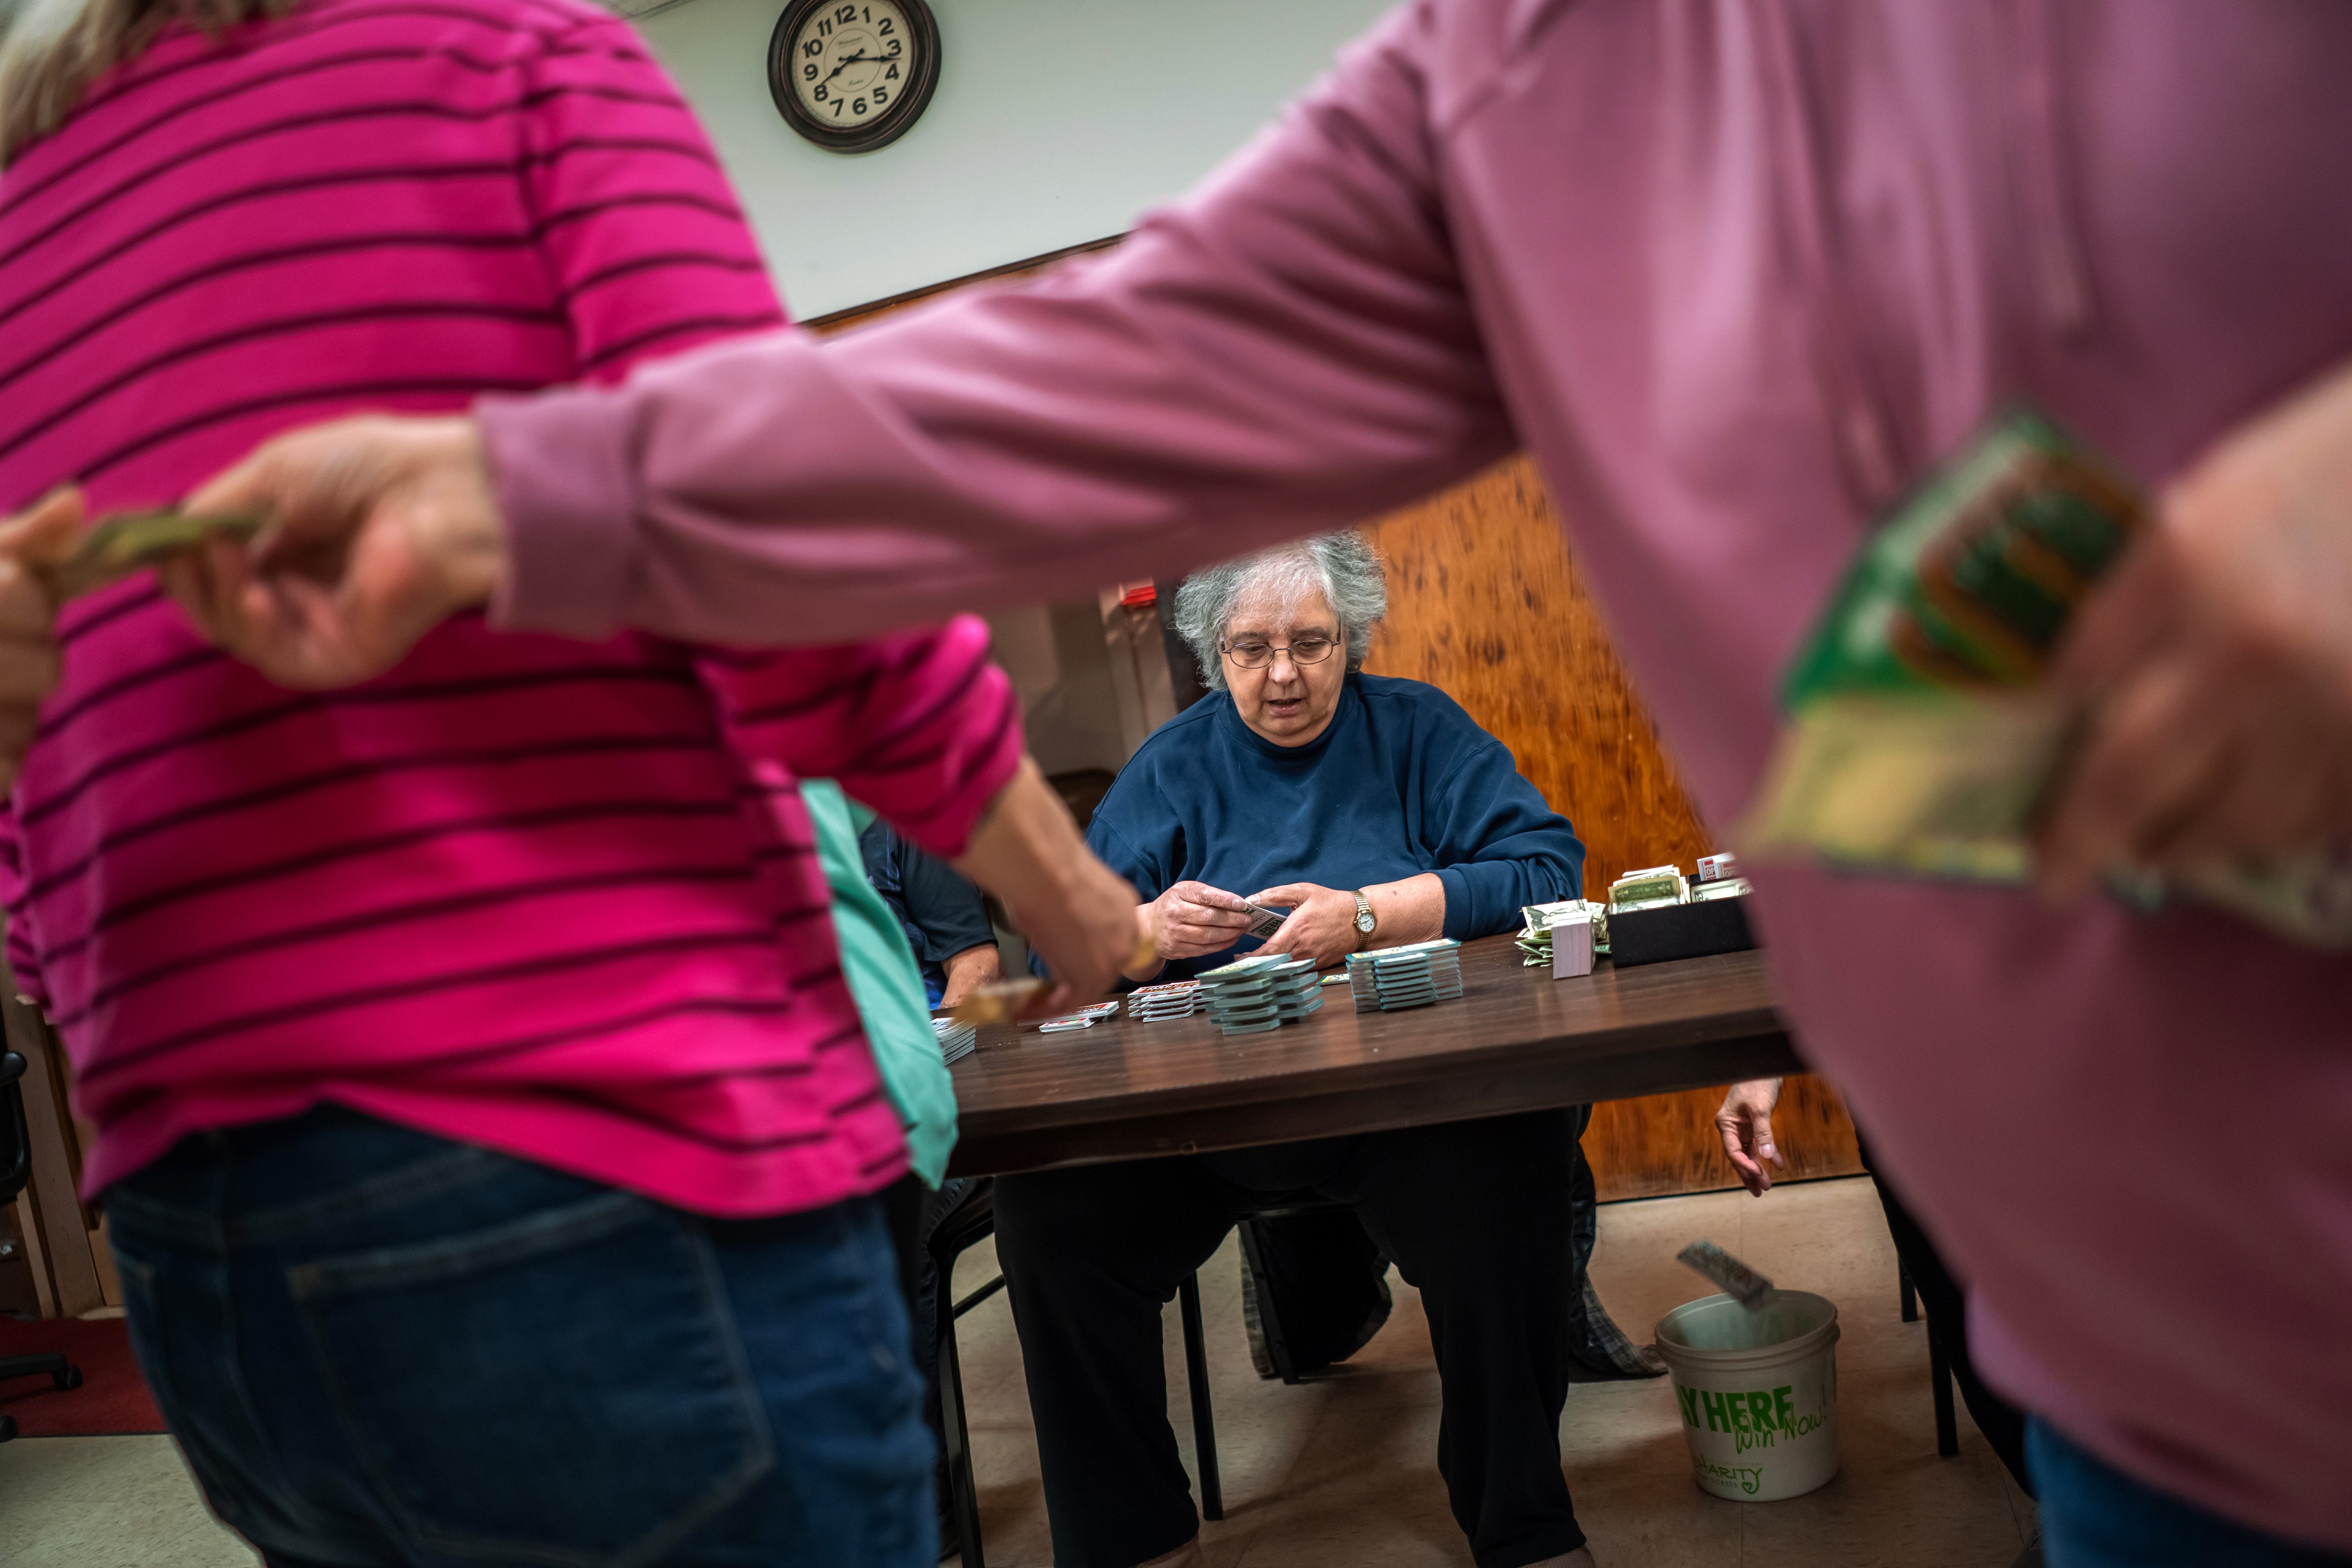 Barb Lusardi, center, of Ishpeming, works on collecting money as a group of women line up to purchase lottery-style game tickets during intermission at the bingo she runs at the Odd Fellows' lodge in Ishpeming on Friday, Feb. 10, 2023, in Michigan's Upper Peninsula.